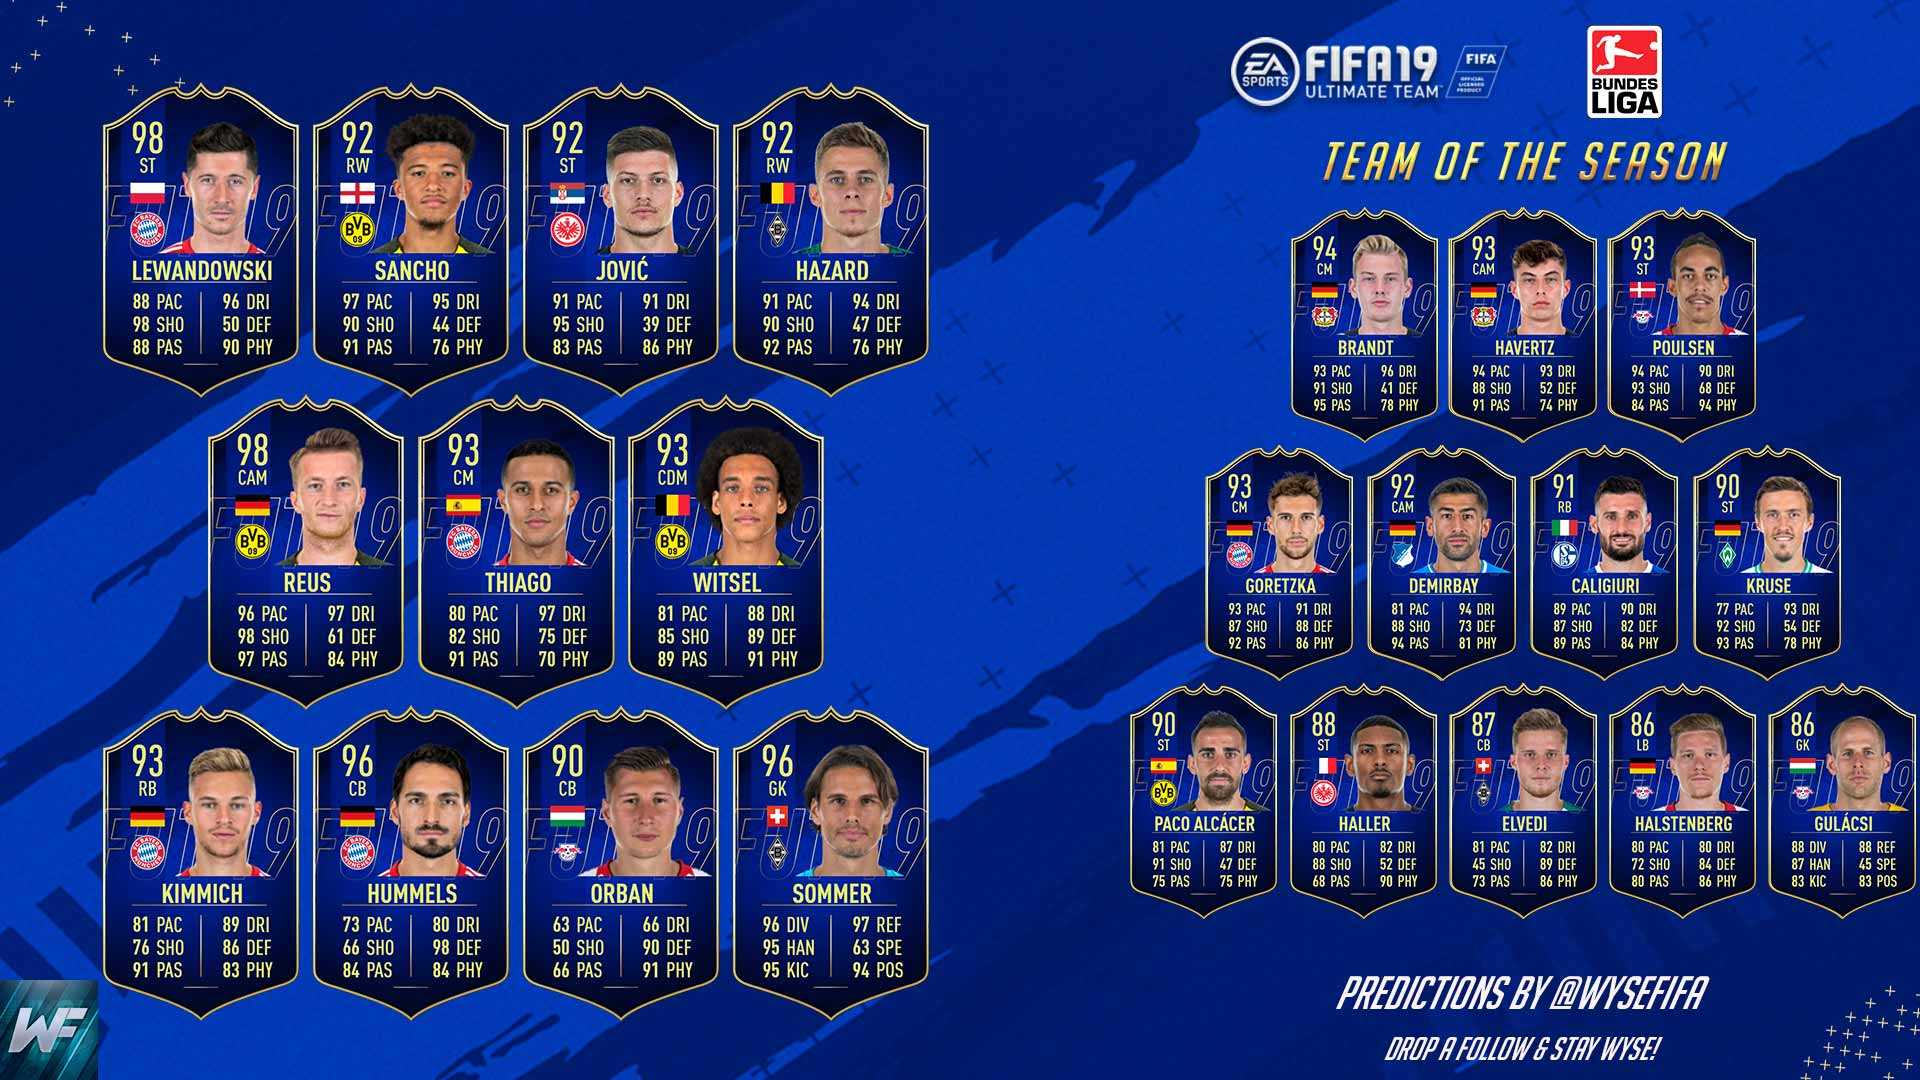 FIFA 19 Scouting and EDA